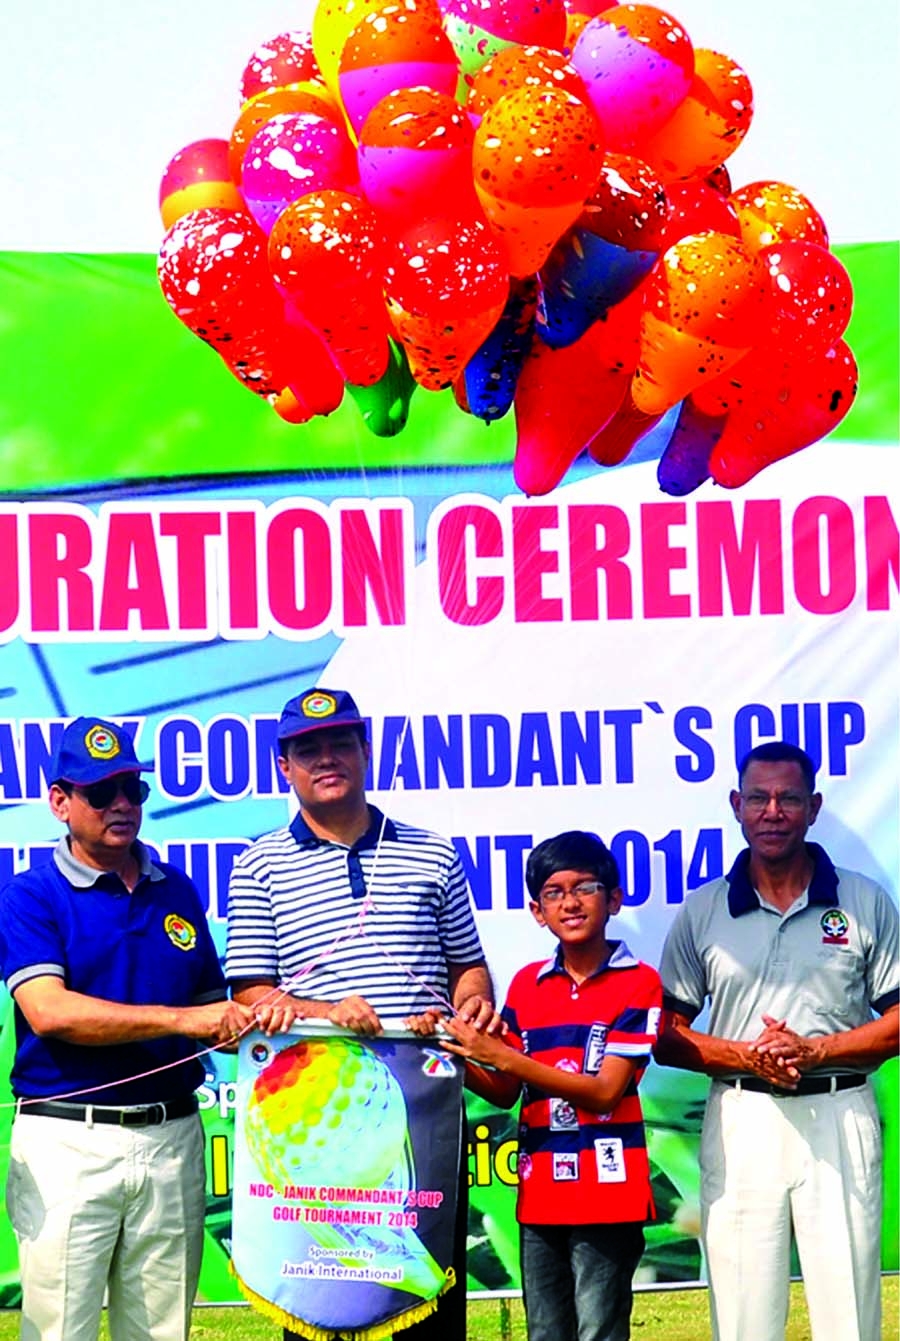 Deputy Minister for Forest and Environment Abdullah Al Islam Jacob inaugurating the NDC-Zink Commandants Cup Golf Tournament by releasing the balloons as the chief guest at the Kurmitola Golf Club in Dhaka Cantonment on Saturday. National Defence College